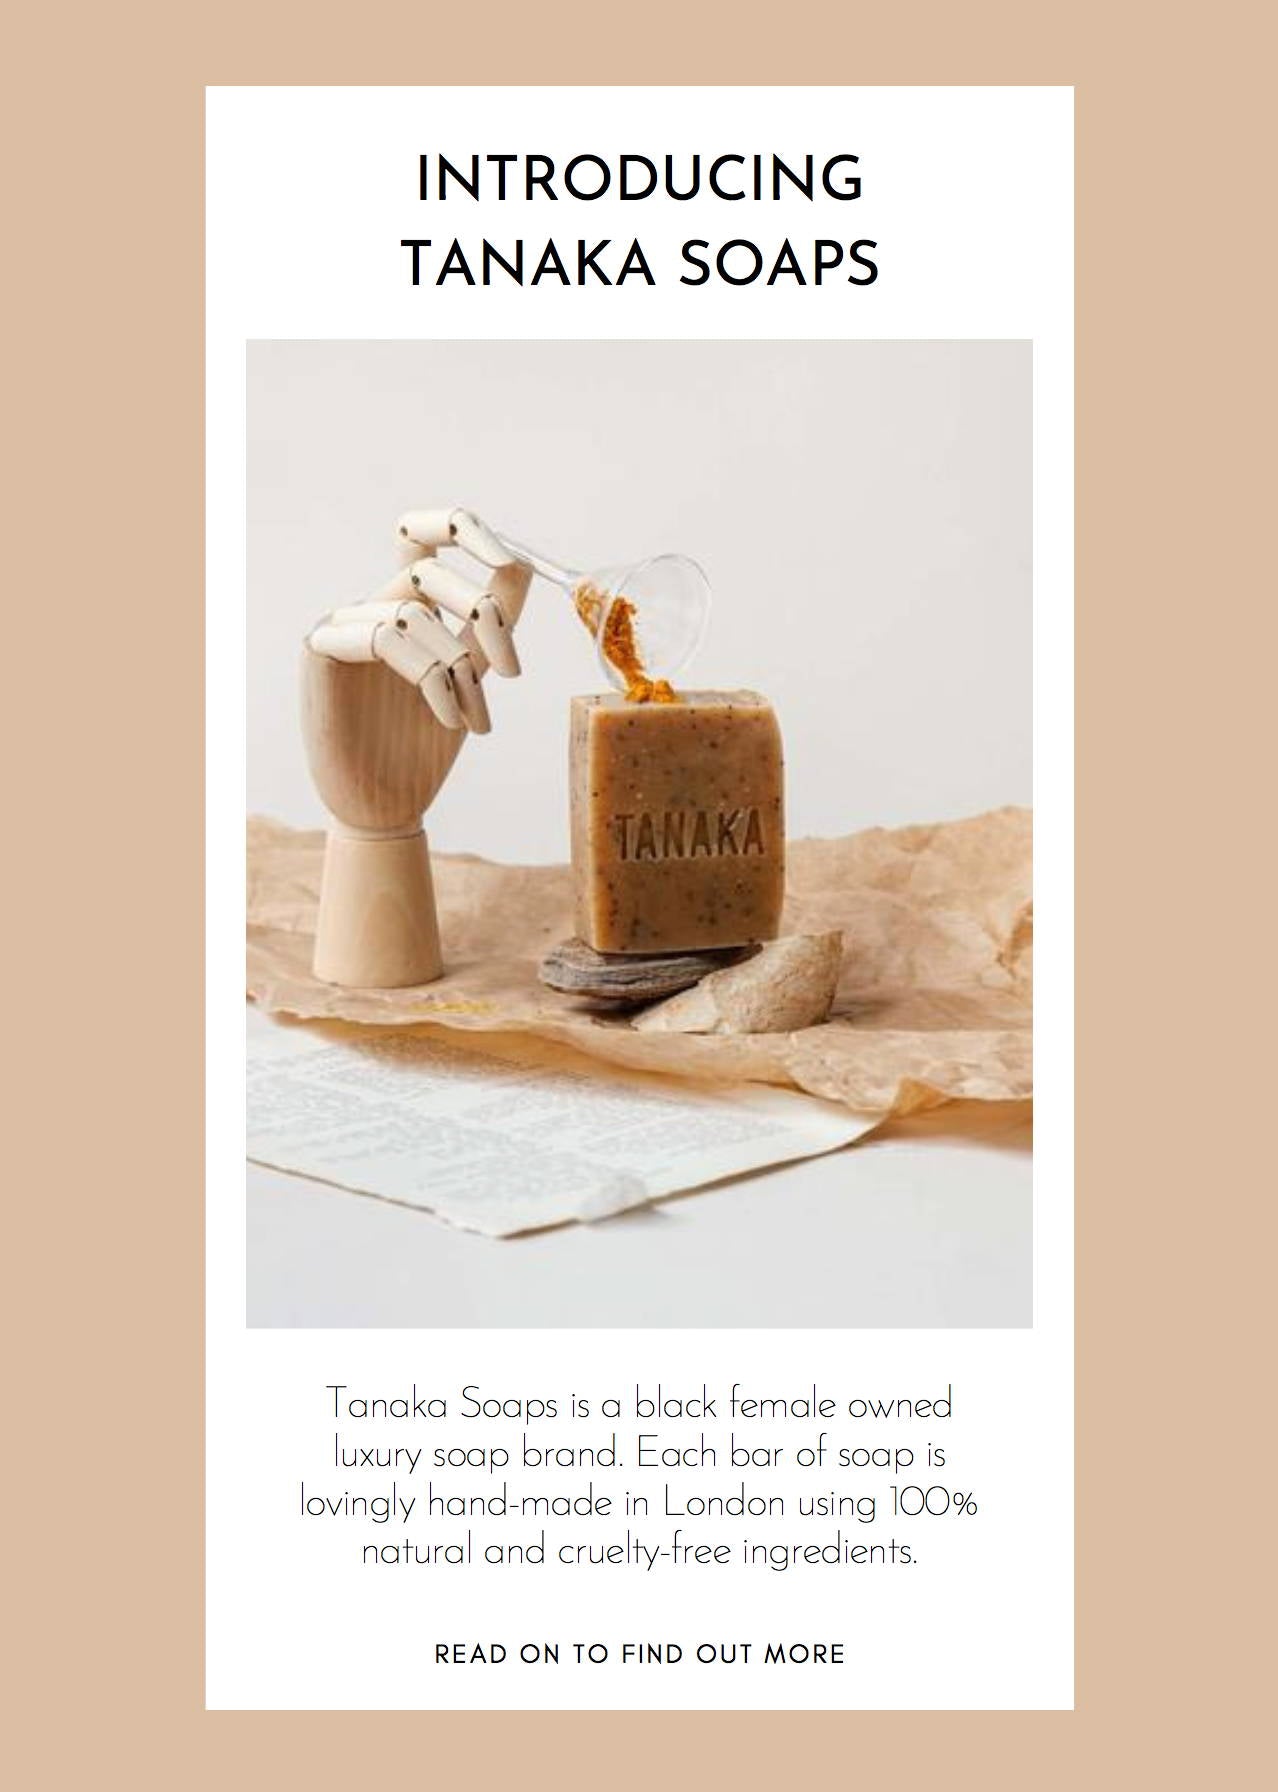 Introducing black owned brand Tanaka Soaps